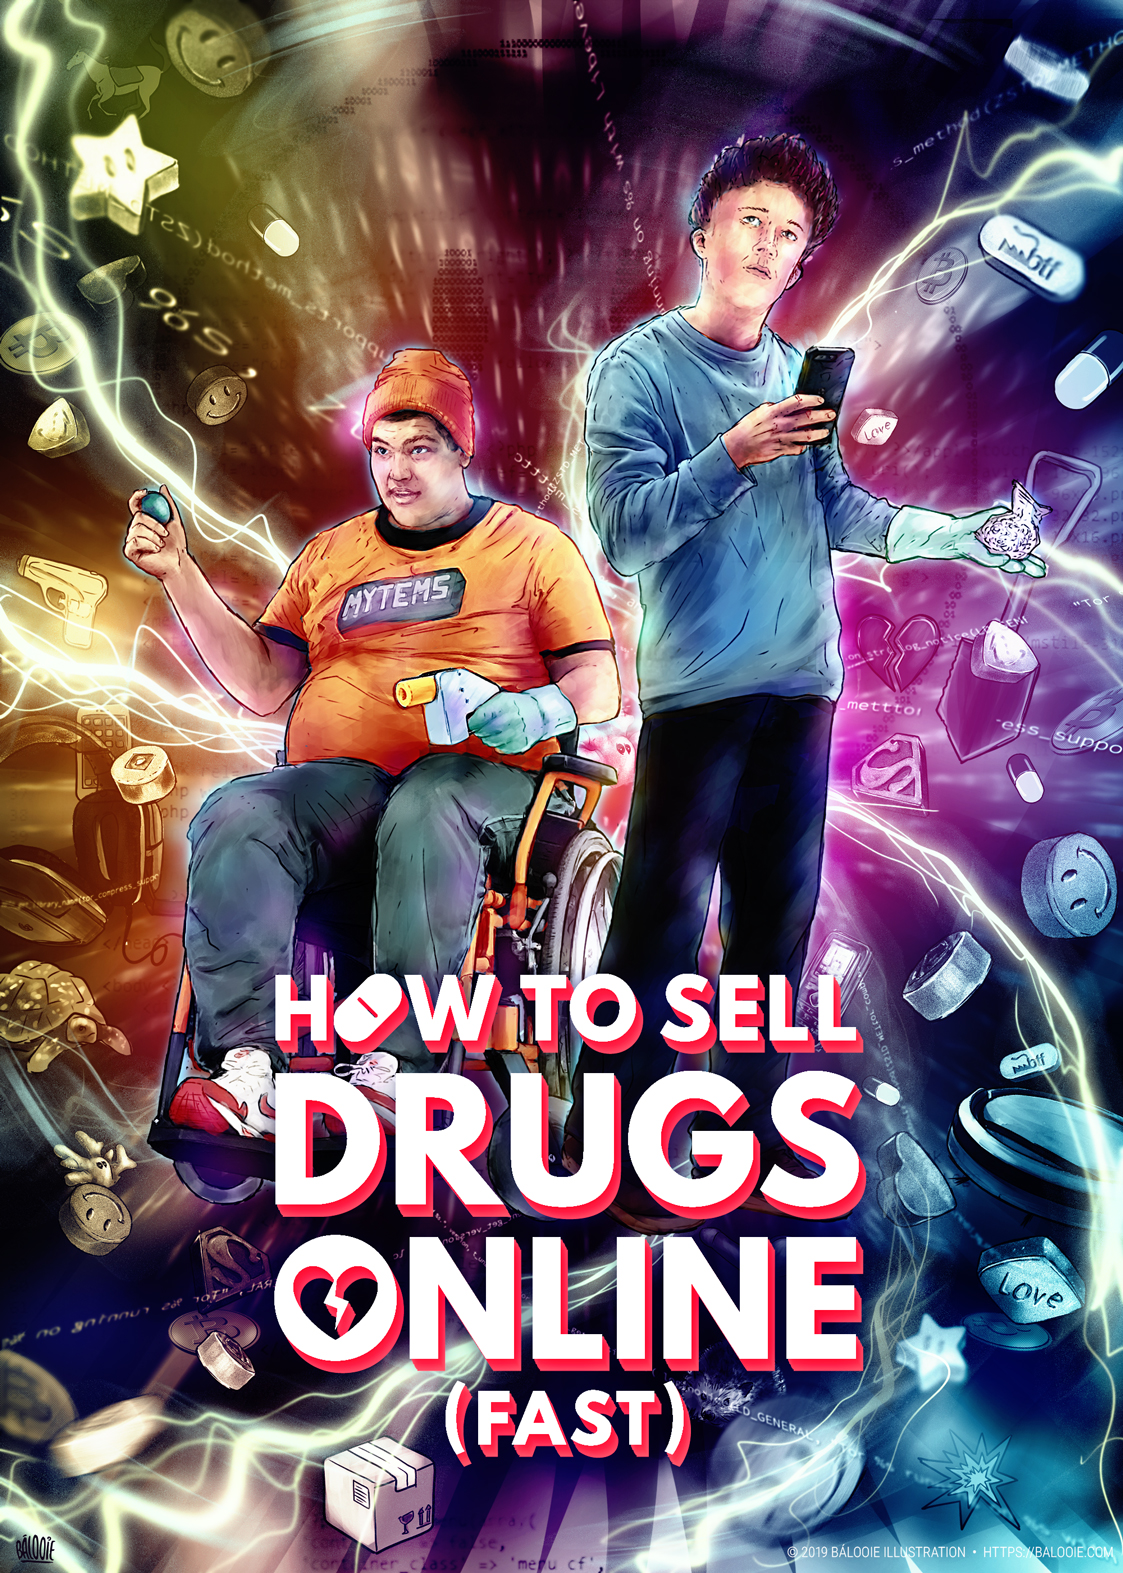 How To Sell Drugs Online (Fast) – Netflix series cover illustration draft 1